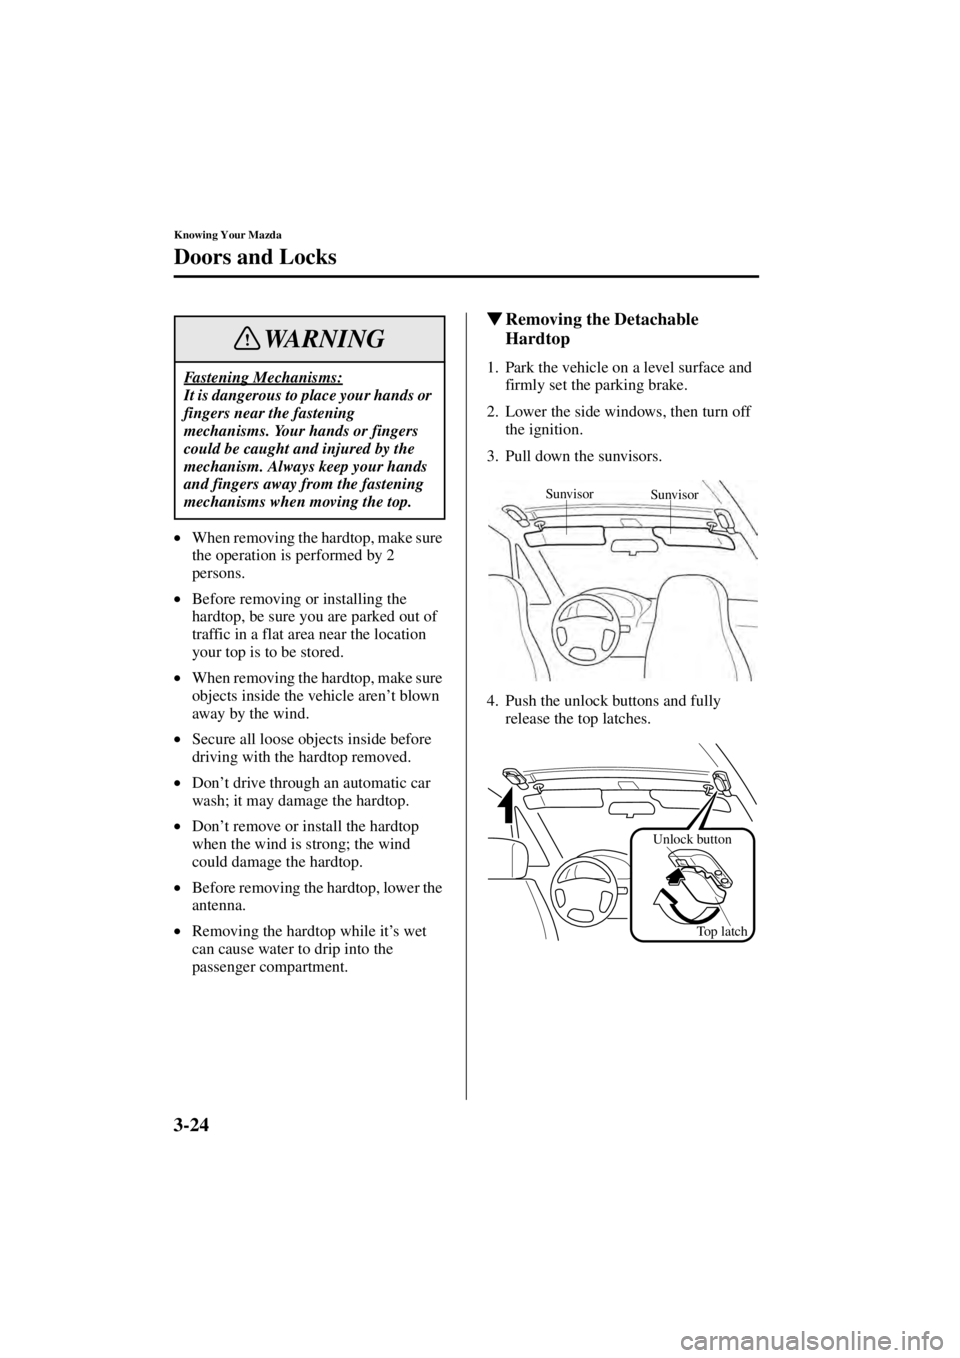 MAZDA MODEL SPEED MX-5 MIATA 2004 Repair Manual 3-24
Knowing Your Mazda
Doors and Locks
Form No. 8T02-EA-03L
•When removing the hardtop, make sure 
the operation is performed by 2 
persons.
• Before removing or installing the 
hardtop, be sure 